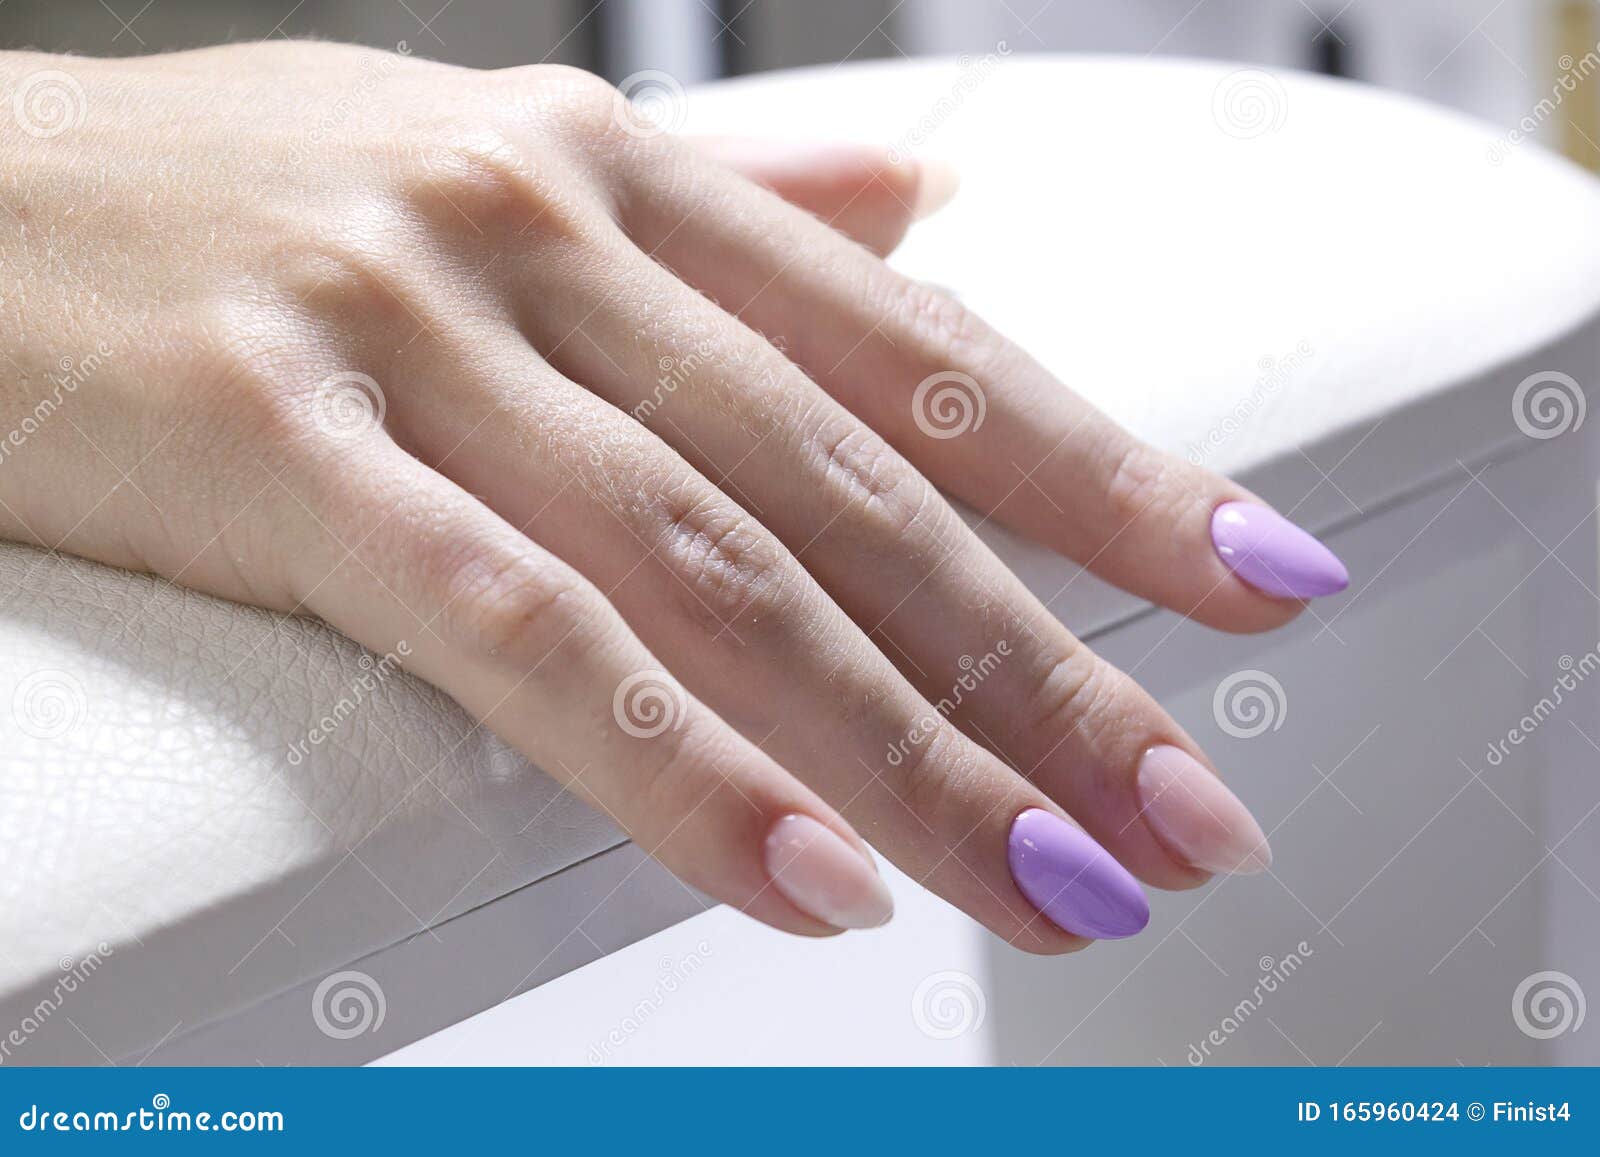 hands of a client with colored gel coated nails closeup.